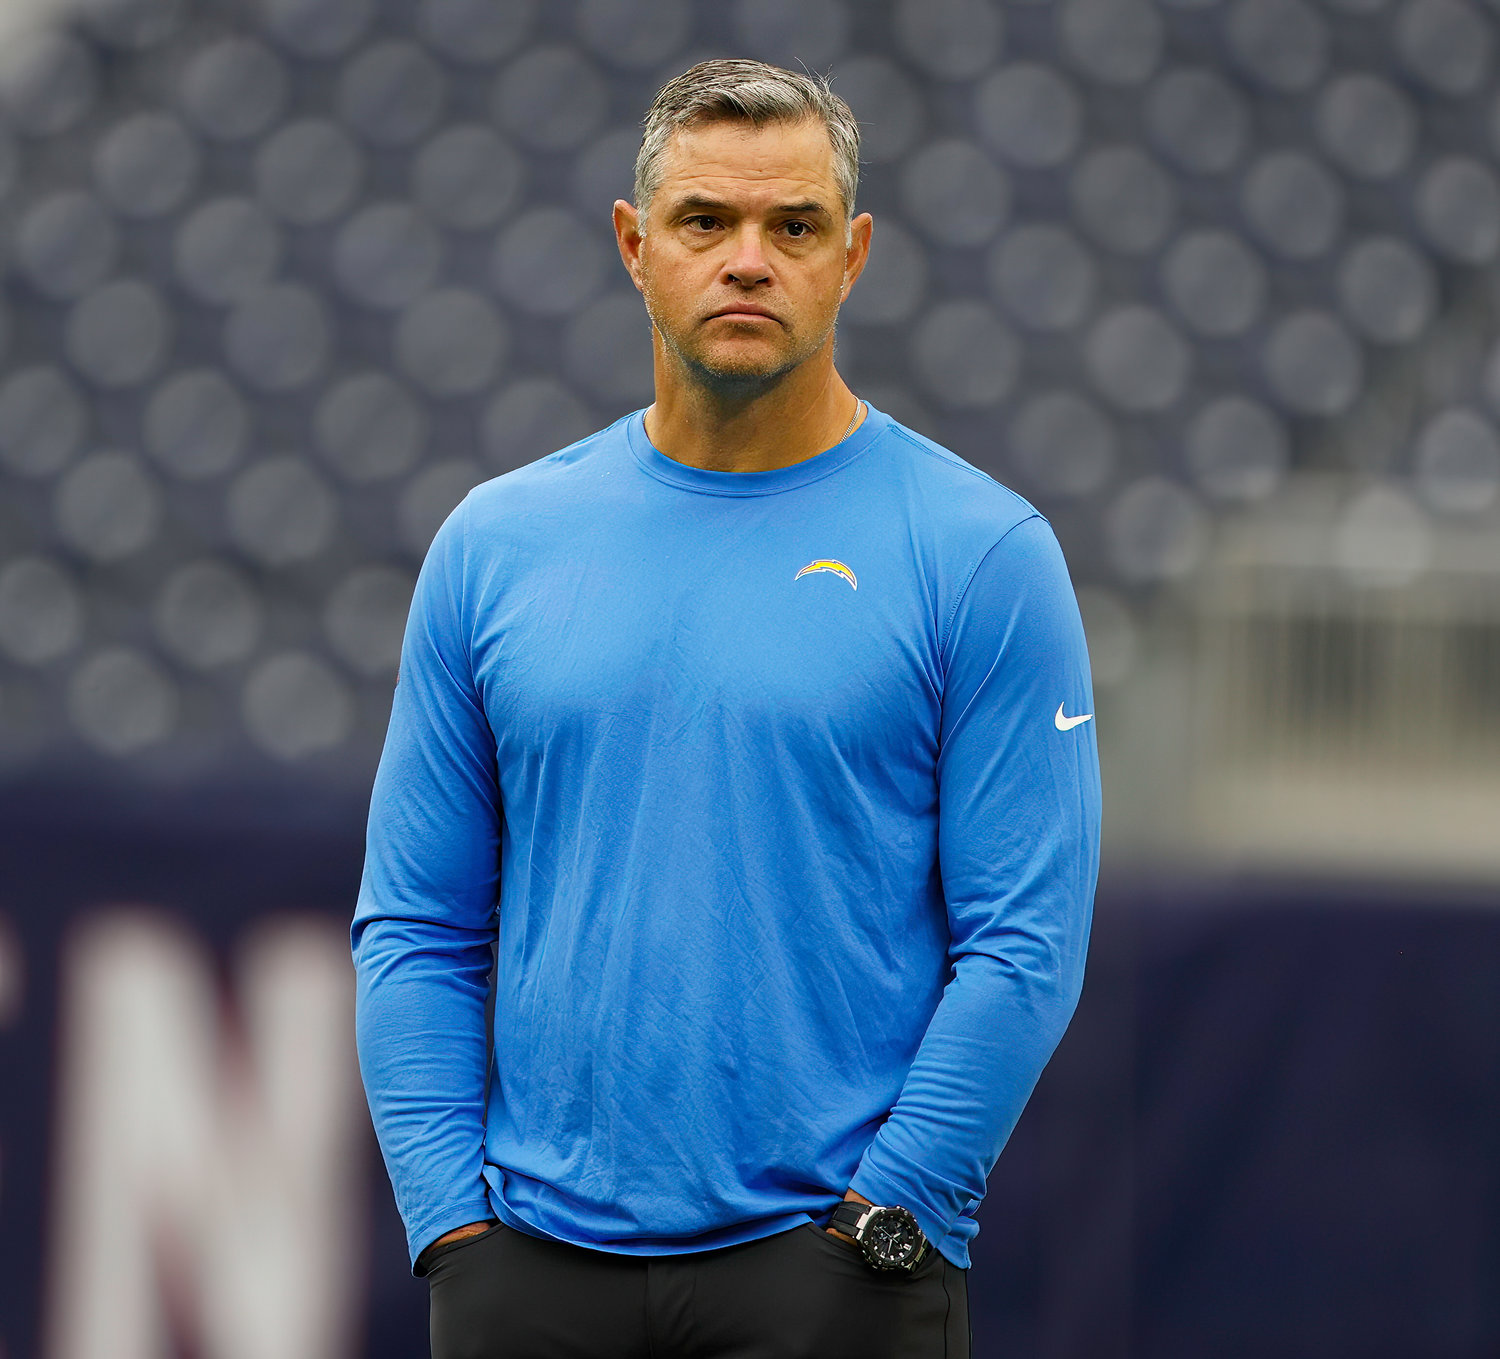 Los Angeles Chargers offensive coordinator Joe Lombardi on the field during warmups before an NFL game between the Texans and the Chargers on Oct. 2, 2022 in Houston.